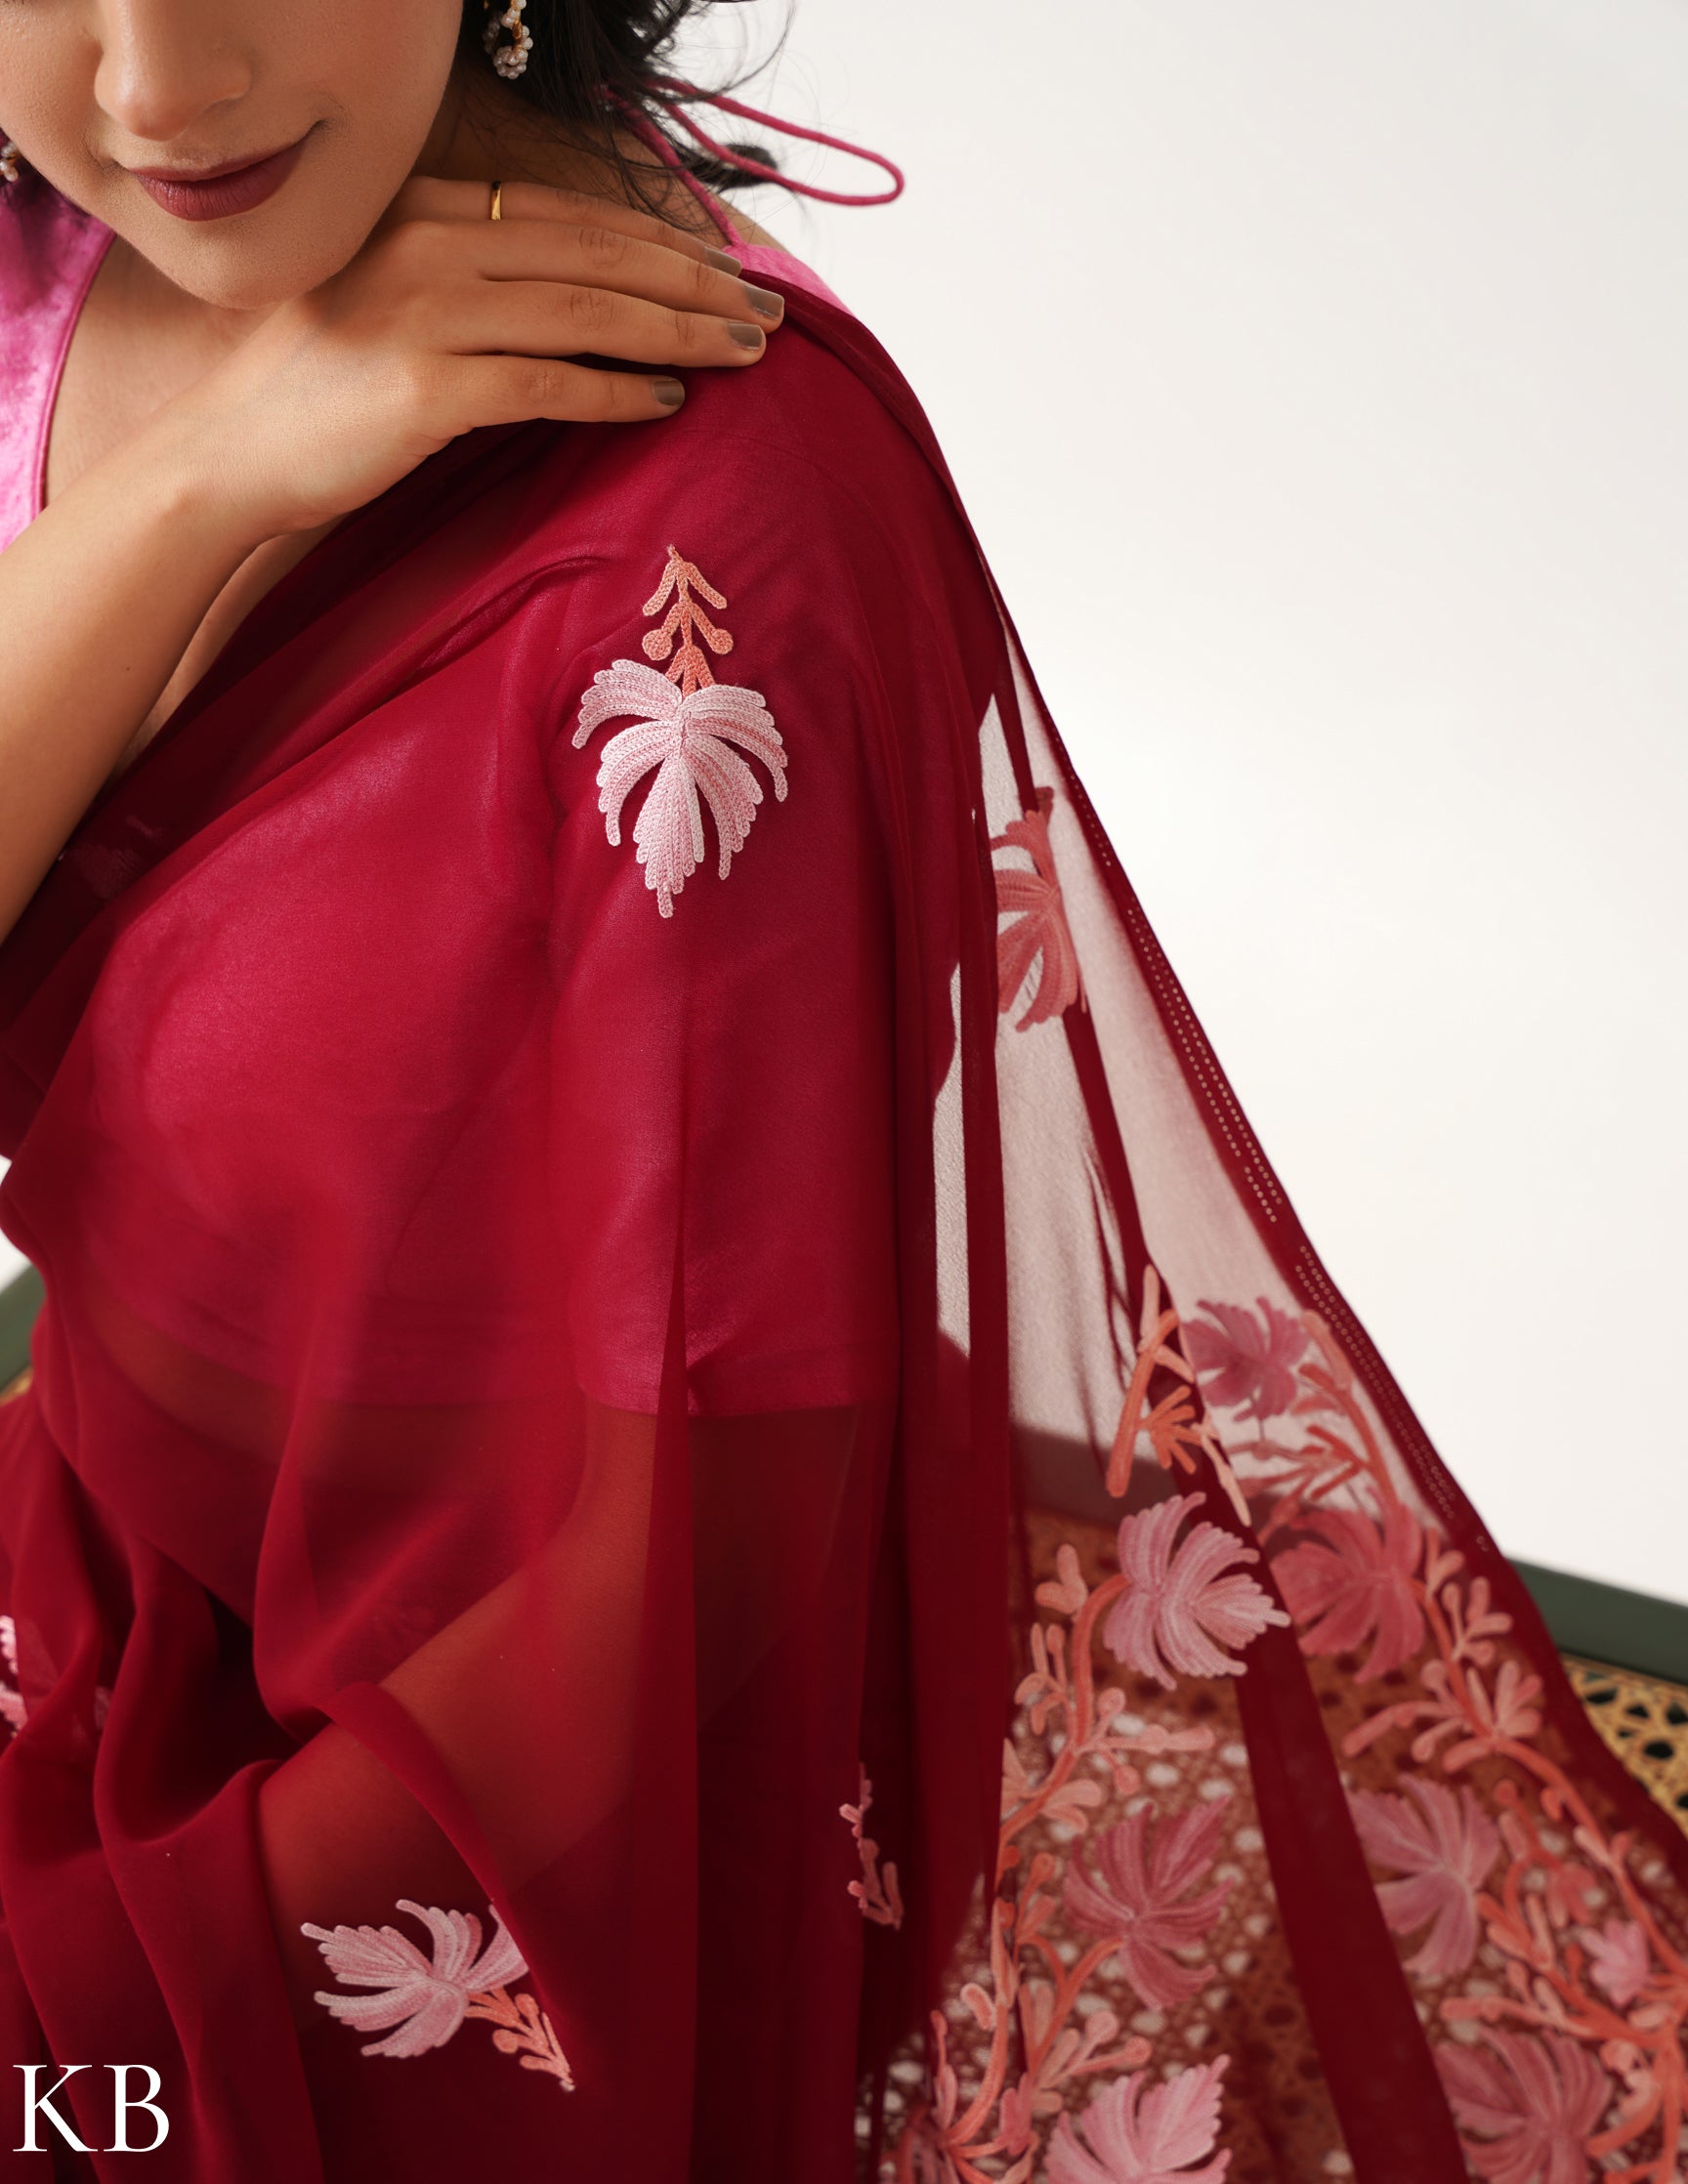 Raspberry with Blush-toned Chinar Embroidery Georgette Saree - Kashmir Box